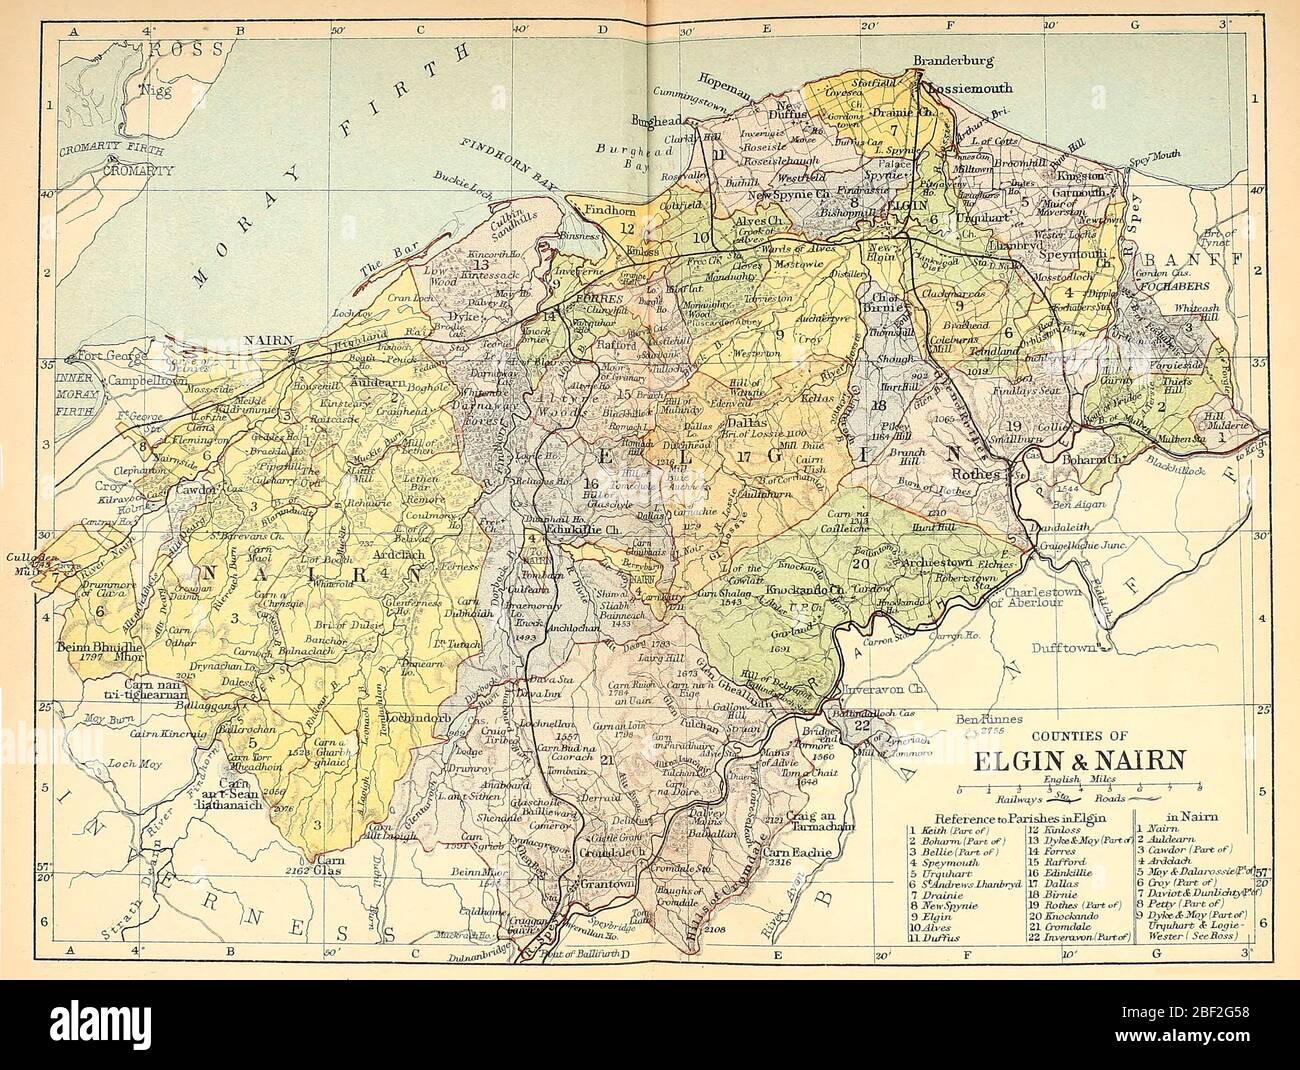 Map of the Counties of Elgin and Nairn, Scotland, circa 1891 Stock Photo